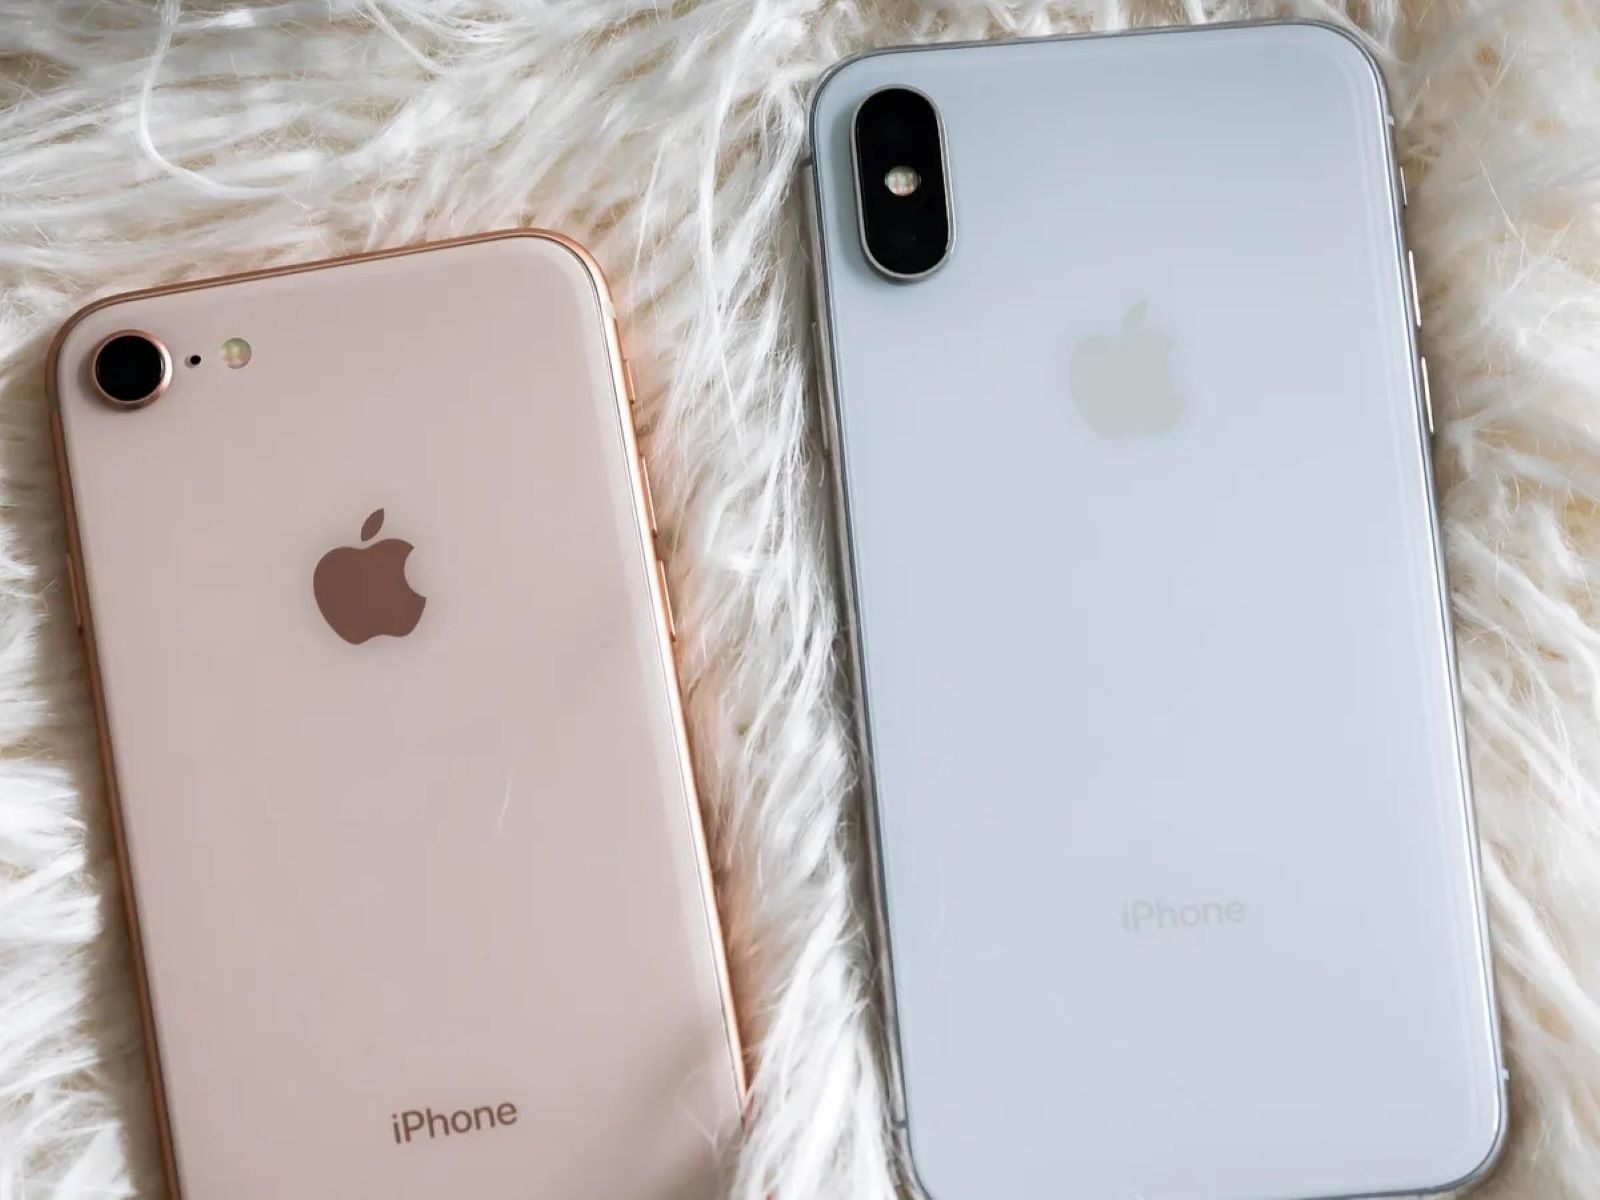 IPhone Face-off: Comparing IPhone 8 And IPhone 10